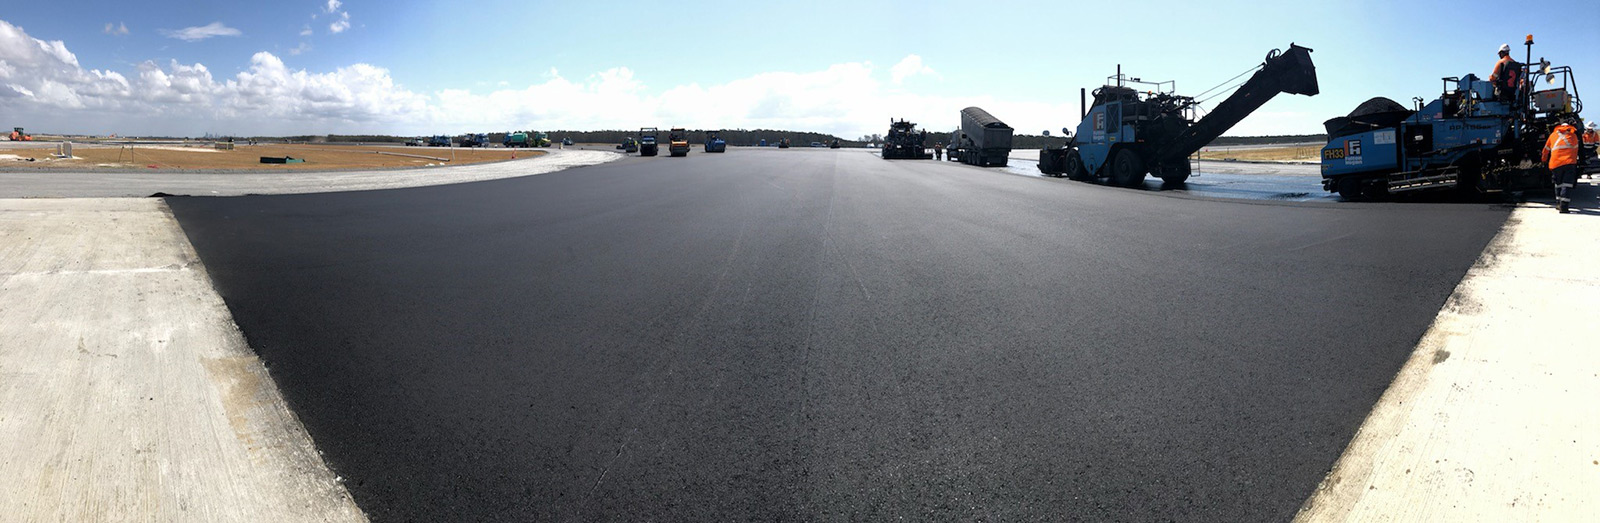 The high strength asphalt layer completed in late September 2019